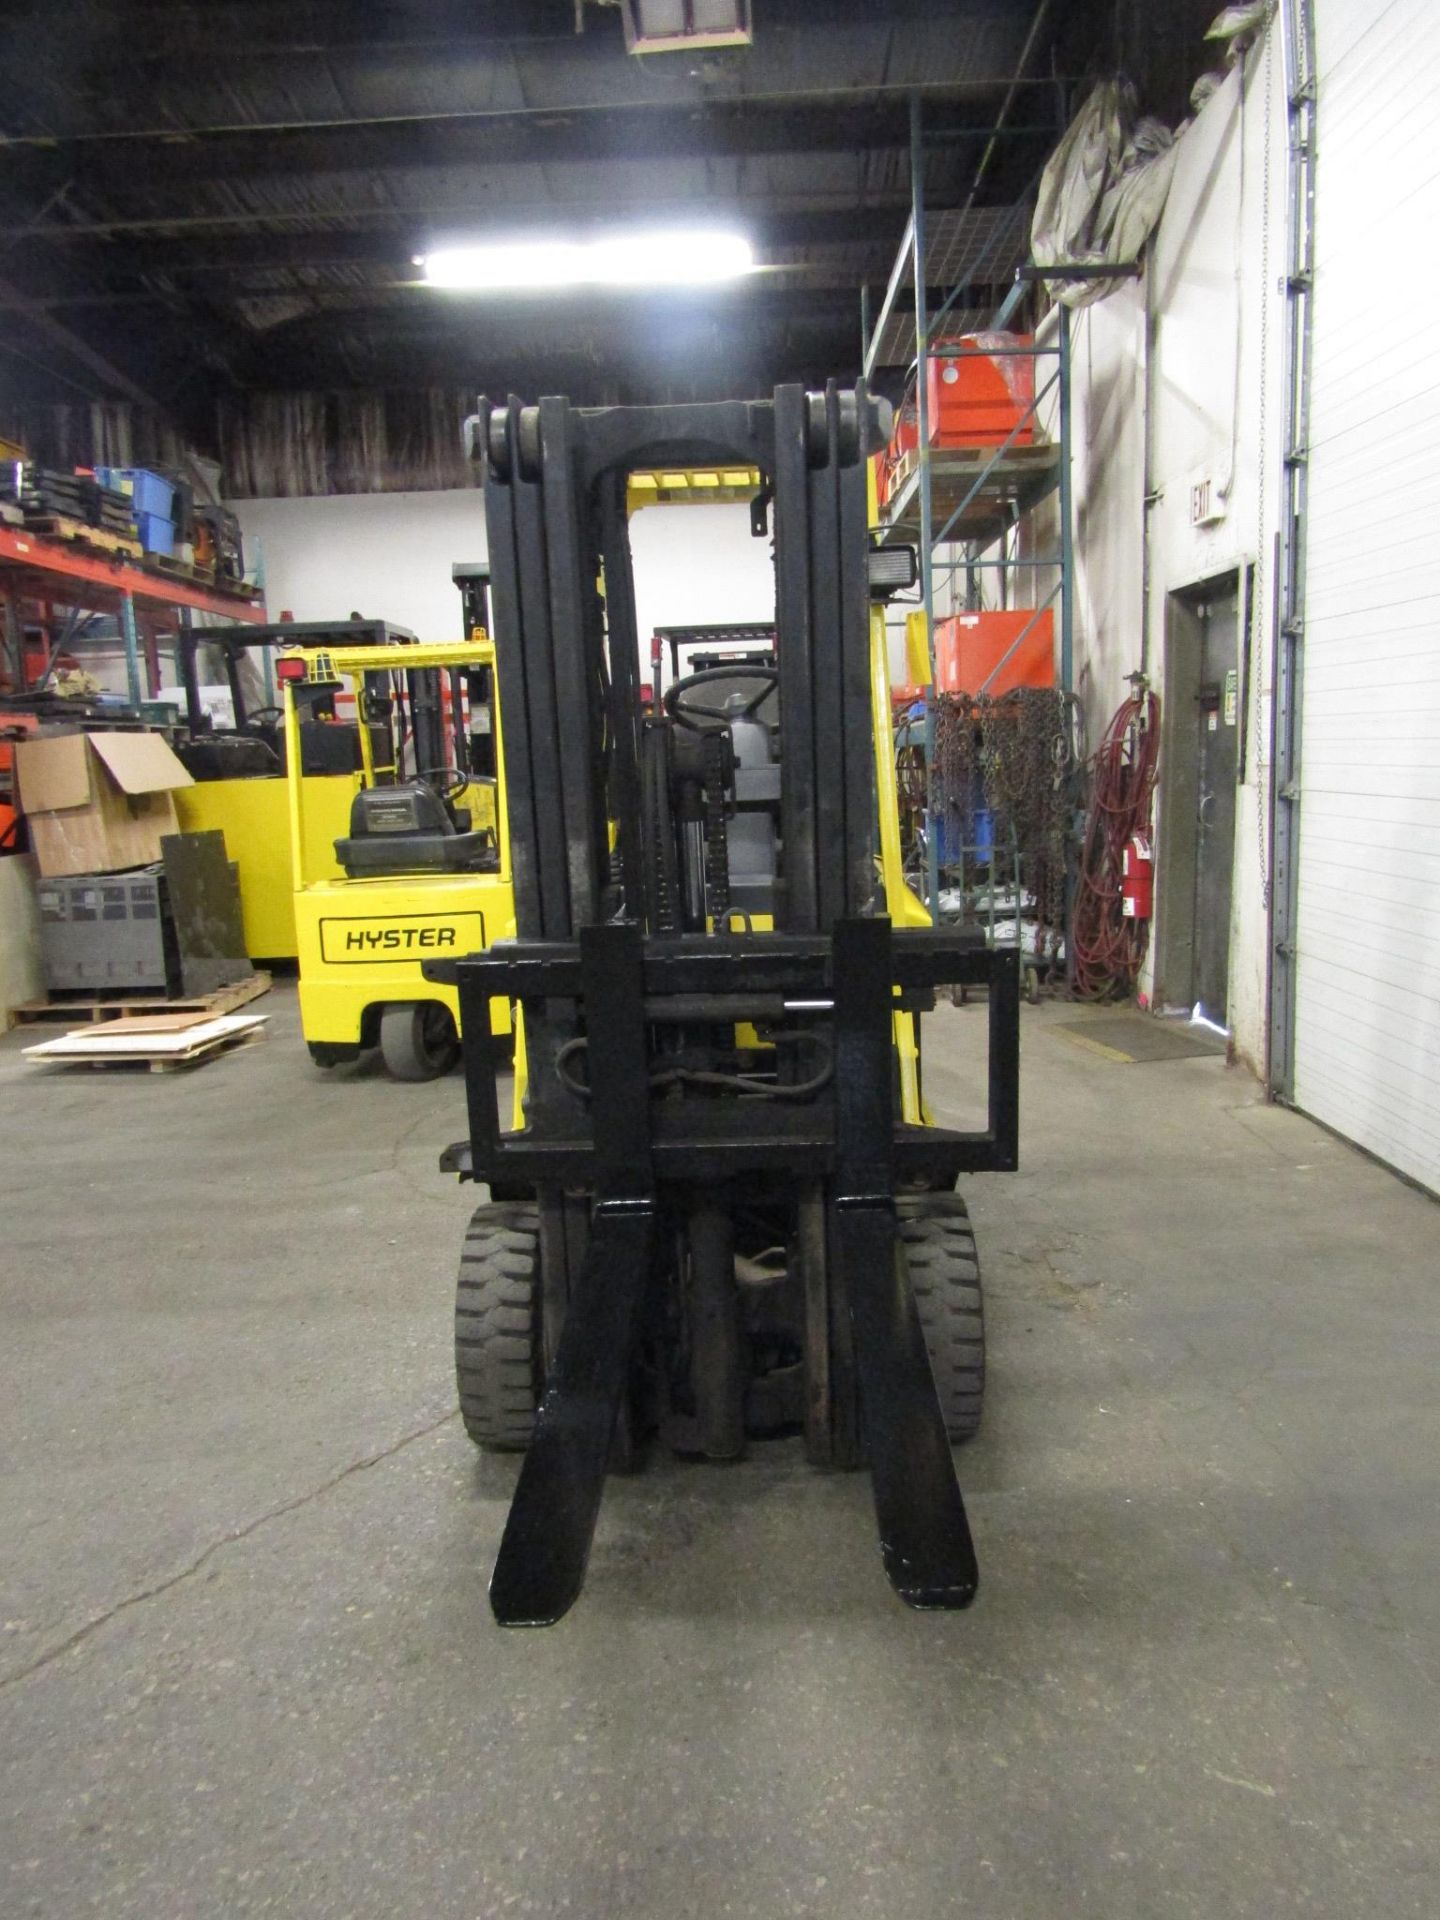 FREE CUSTOMS DOCS & 0 DUTY FEES - Hyster 5000lbs Electric Forklift with sideshift 3-stage mast - Image 2 of 2